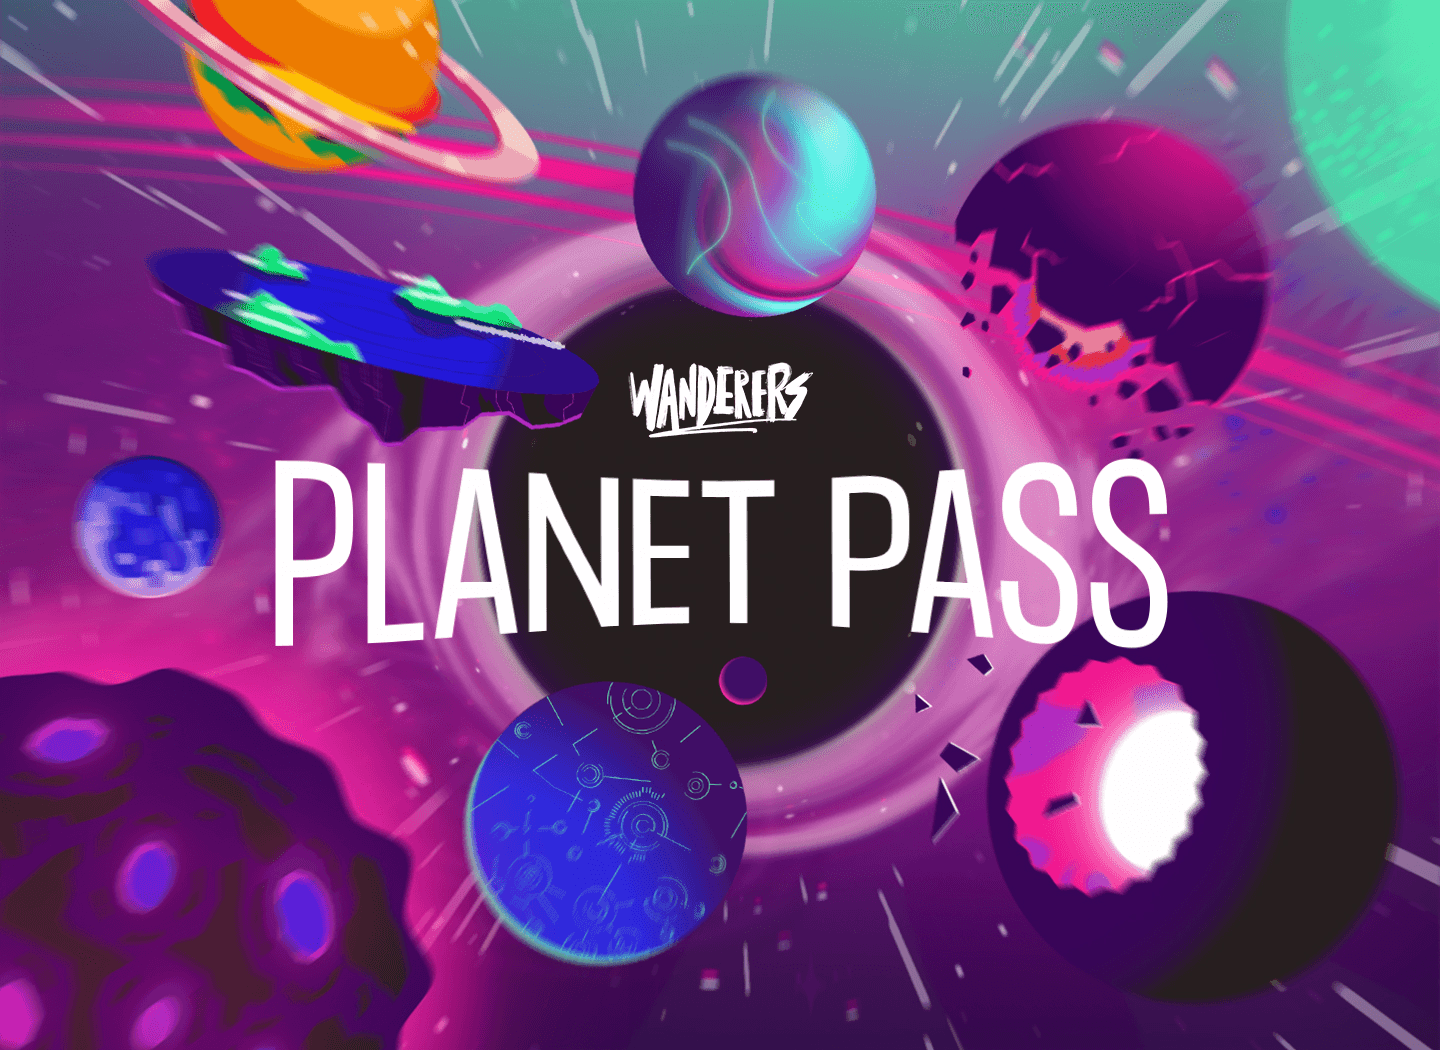 Planet Pass by Wanderers